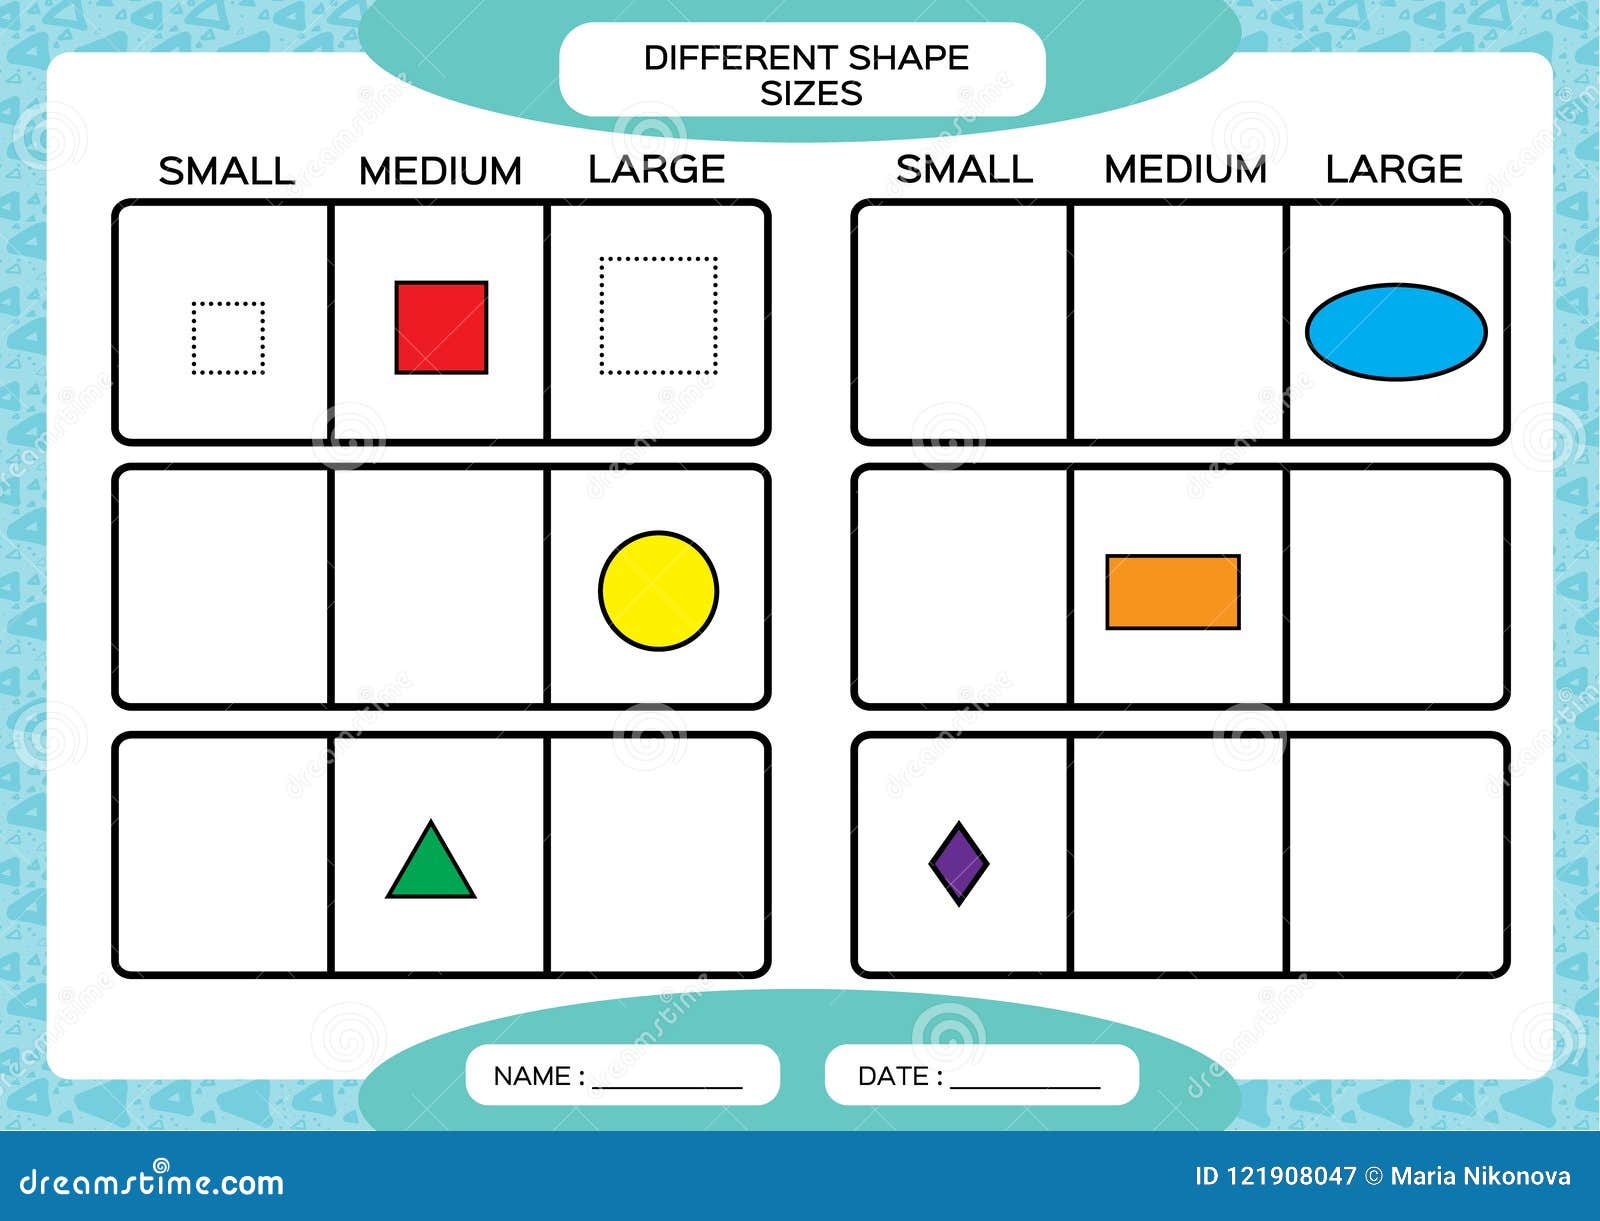 Basic Shapes - Easy Learning Different Shapes